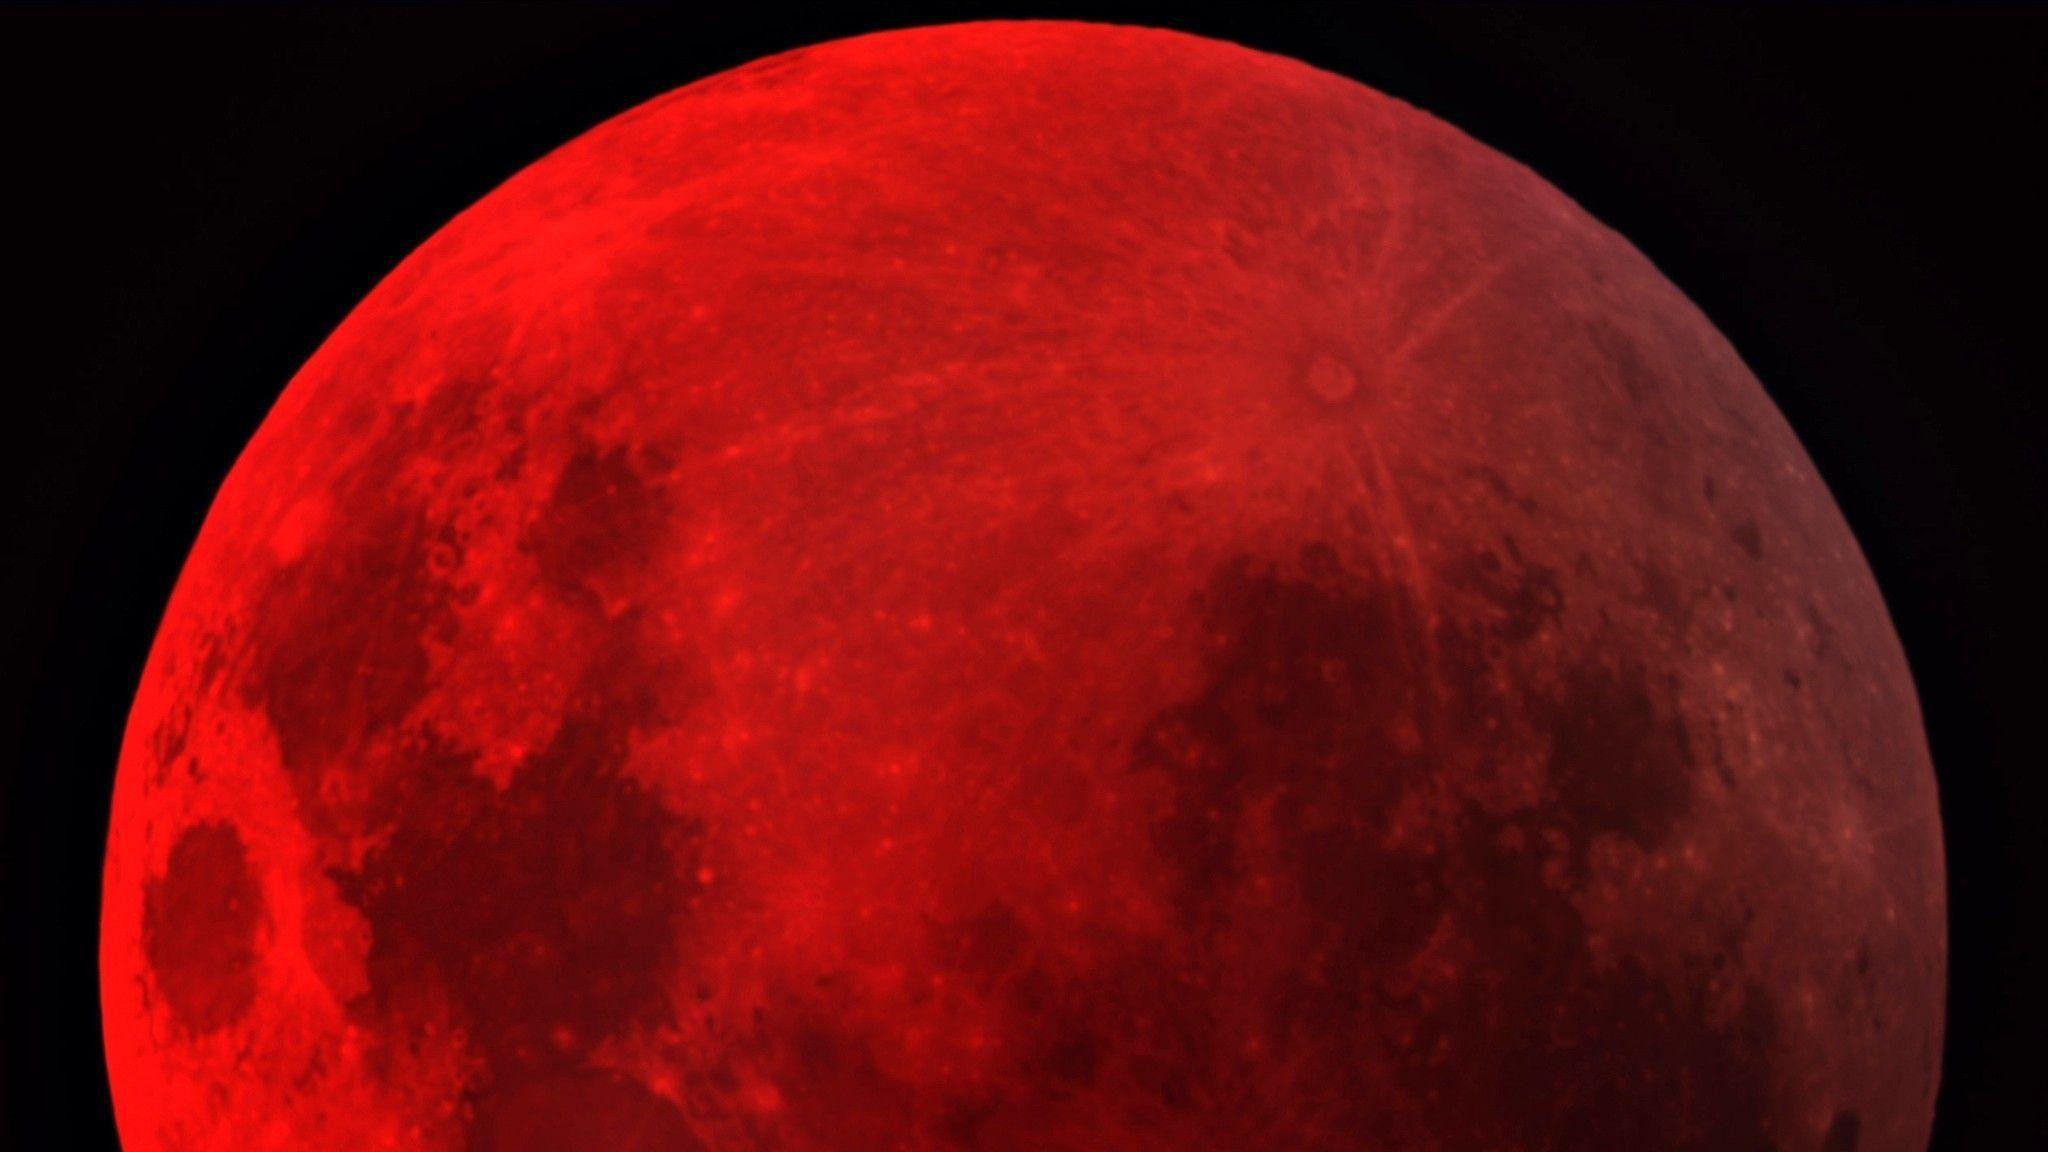 Blood Moon Wallpaper (Images)